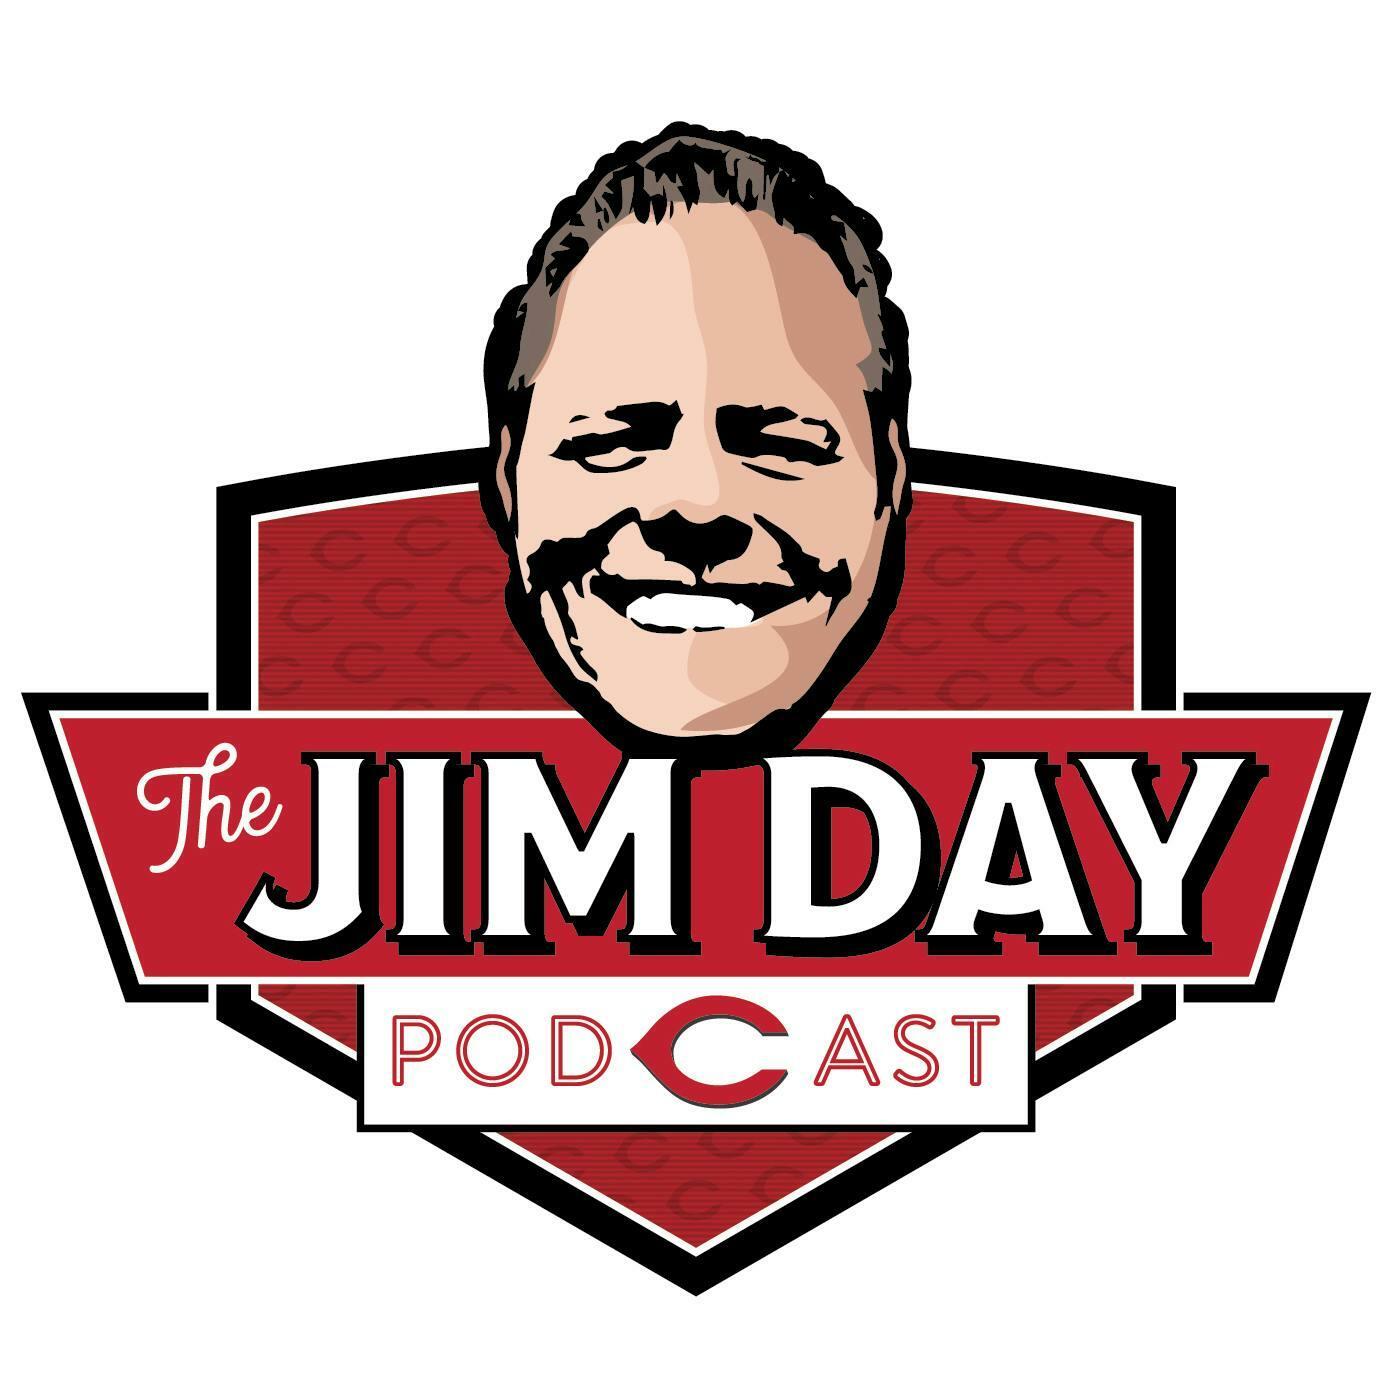 The Jim Day Podcast- Ep. 14 - Joe Morgan - The Jim Day Podcast, Lyssna här